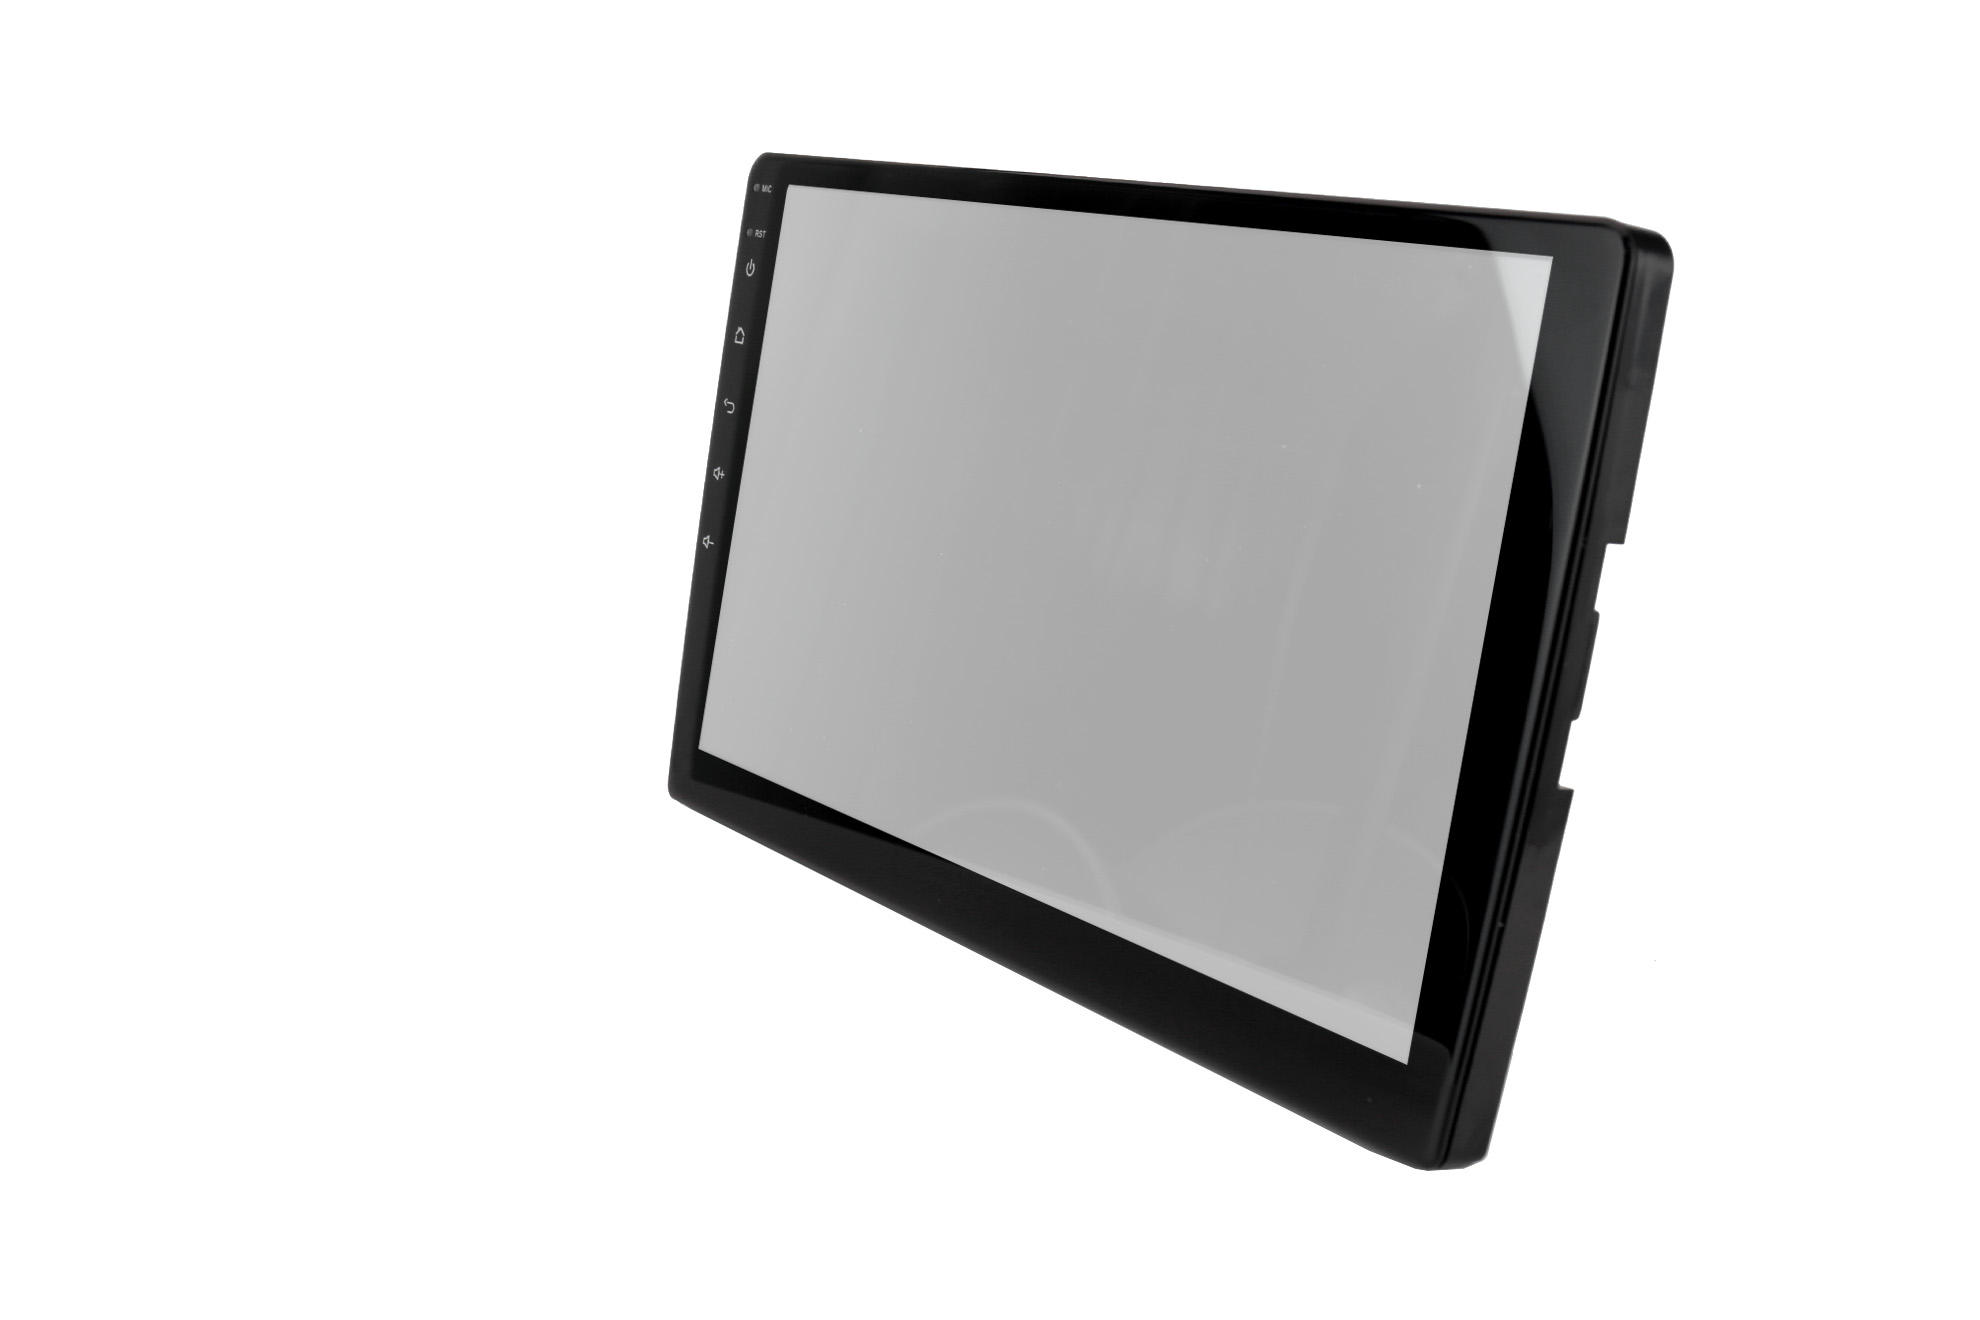 Best Price Double Capacitive Touch Screen Car Gps Best 2 Din 9 Inch Car Dvd Player